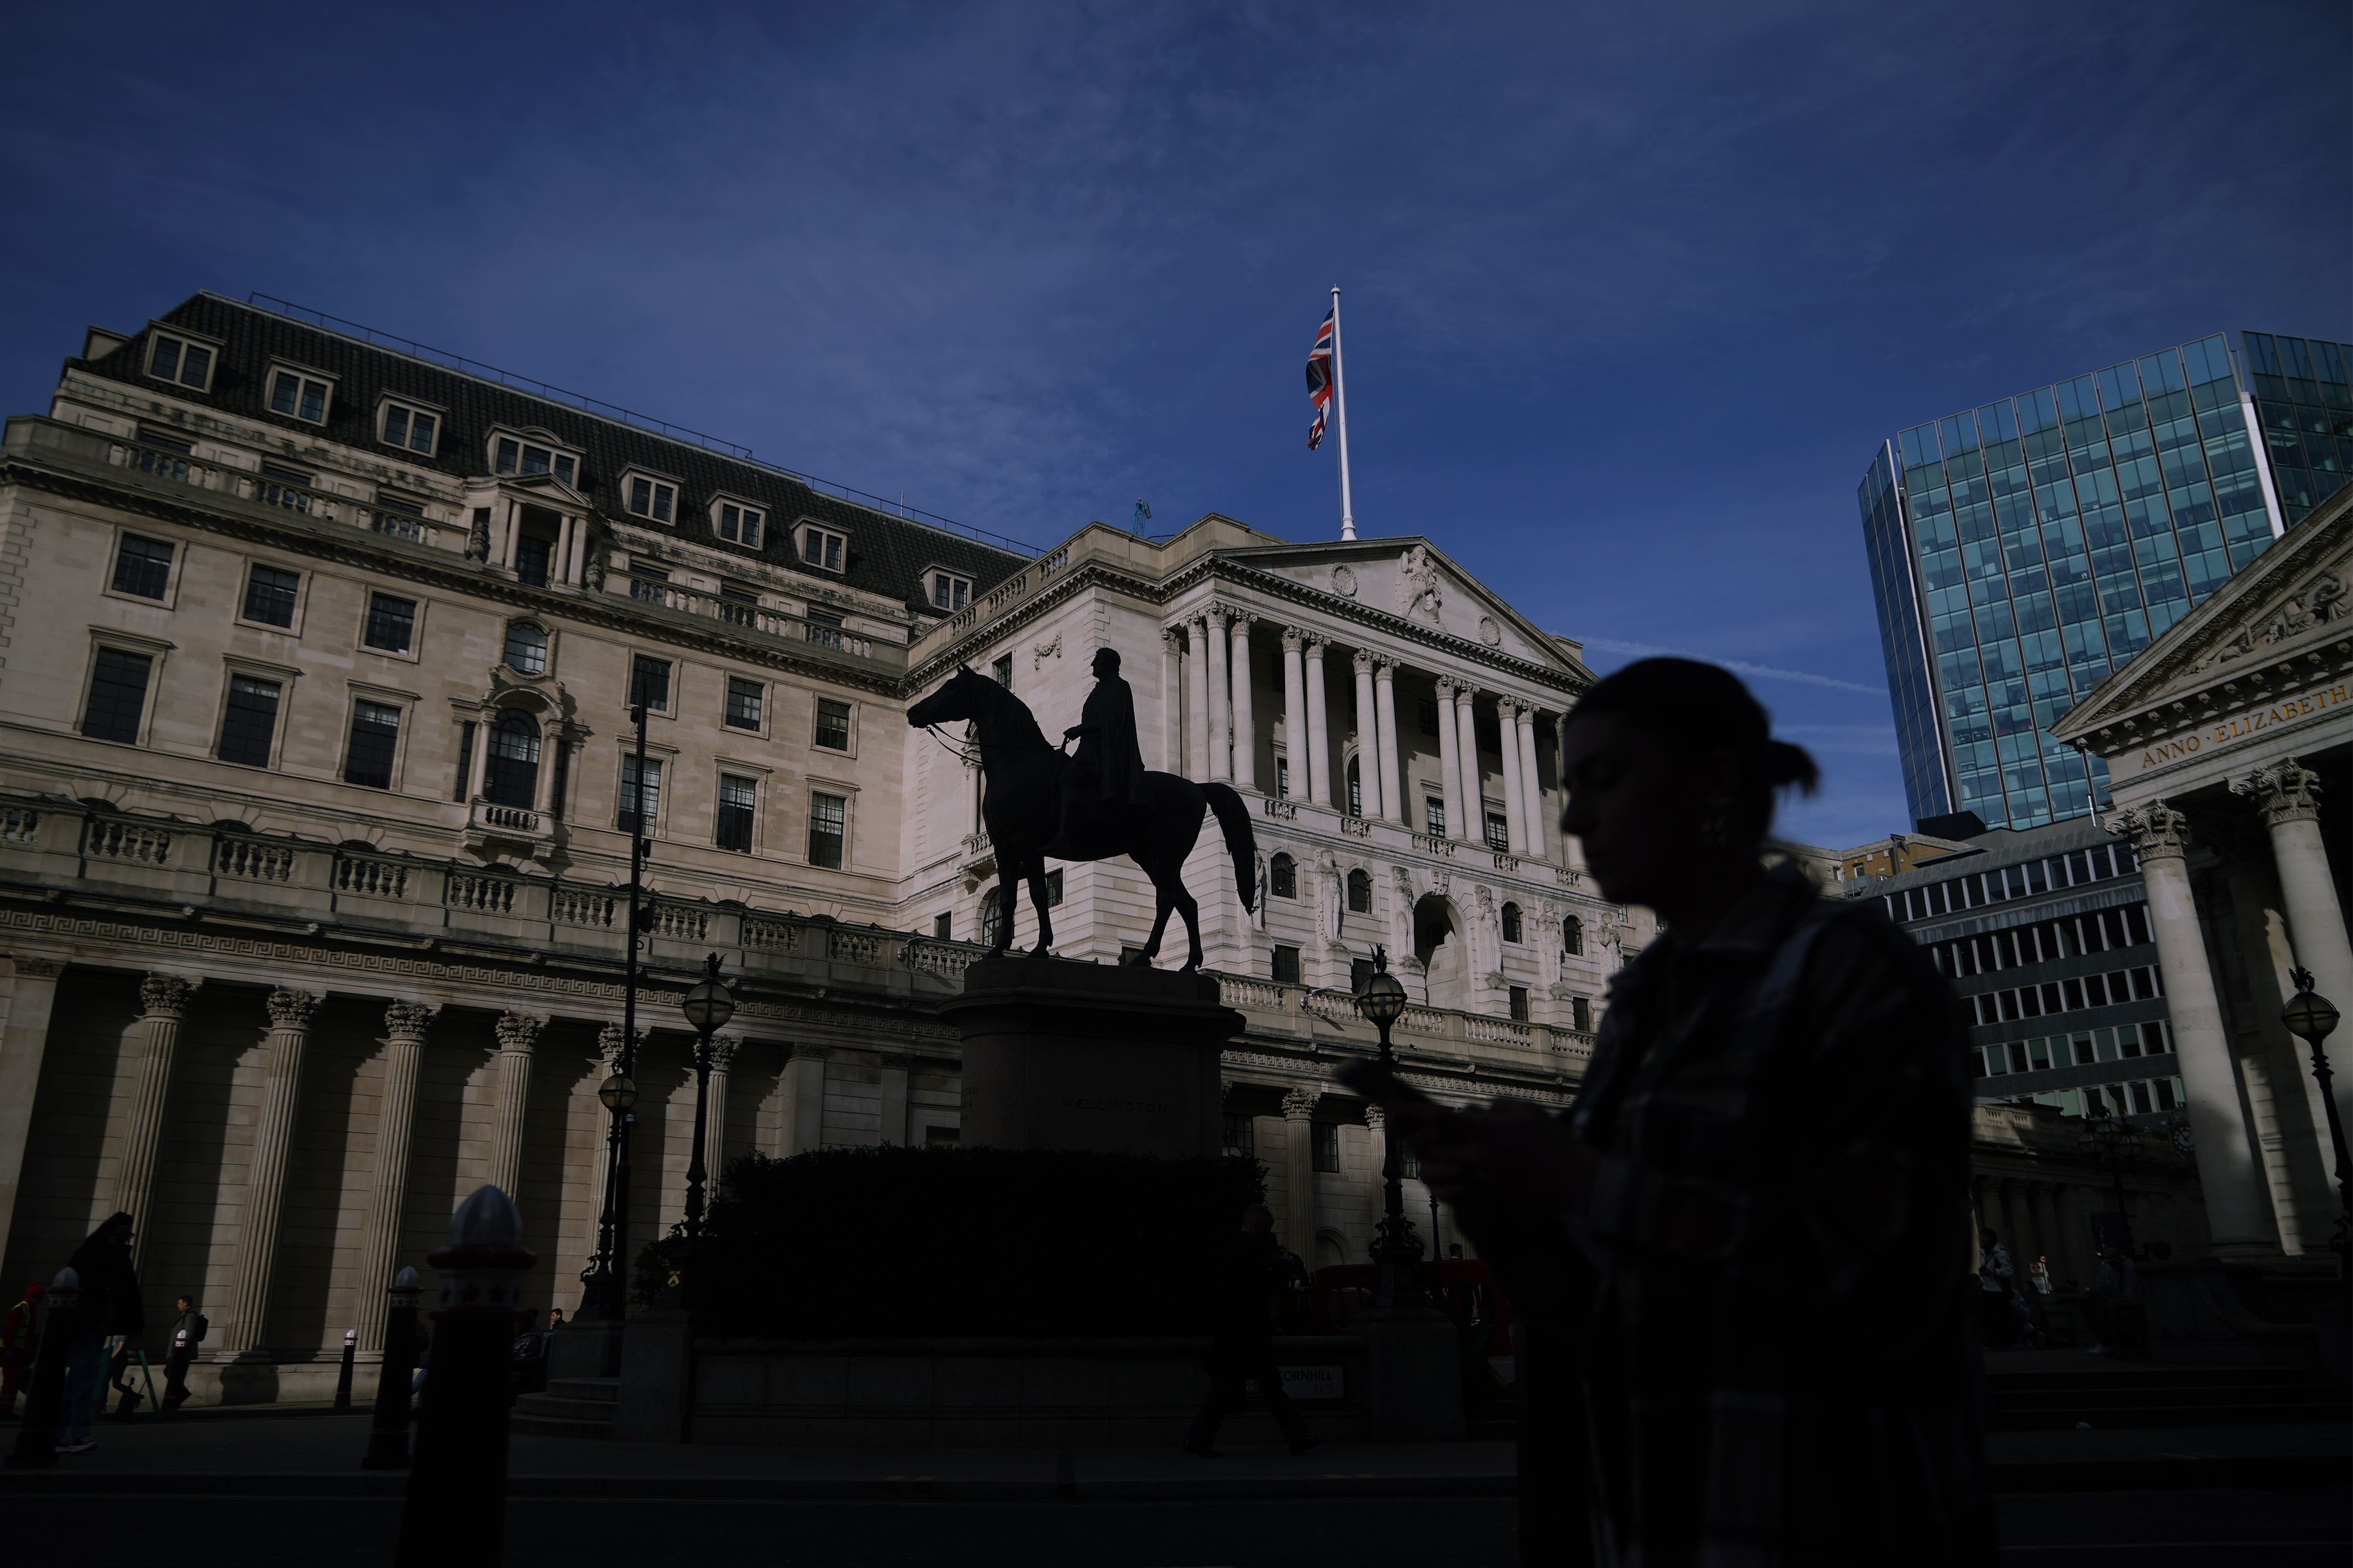 The Bank of England meets several times a year to set interest rates